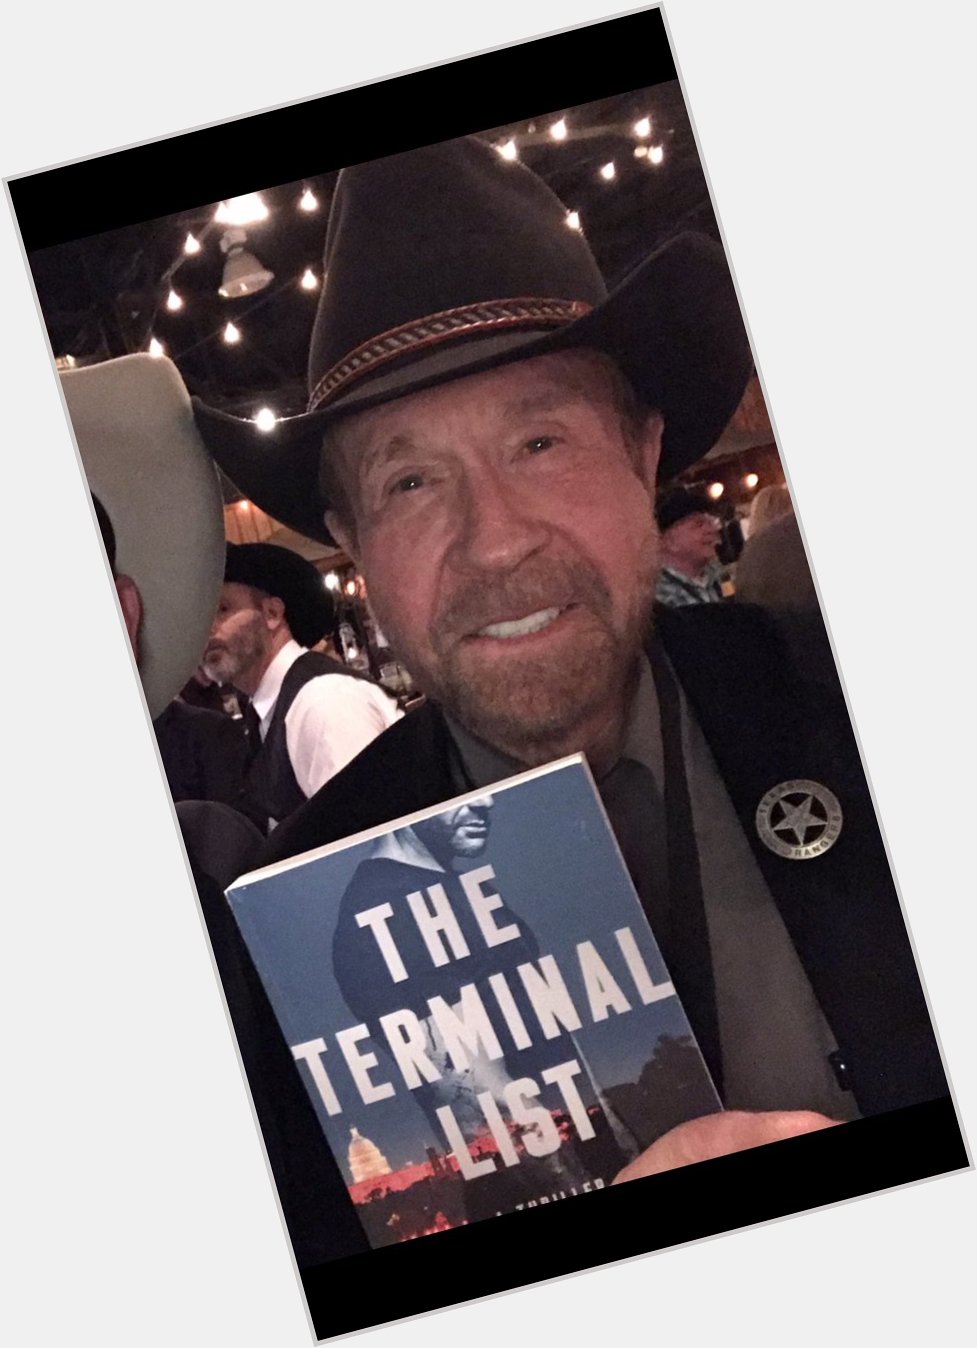 Happy Birthday Chuck Norris! Thank you for all your support of The Terminal List!  